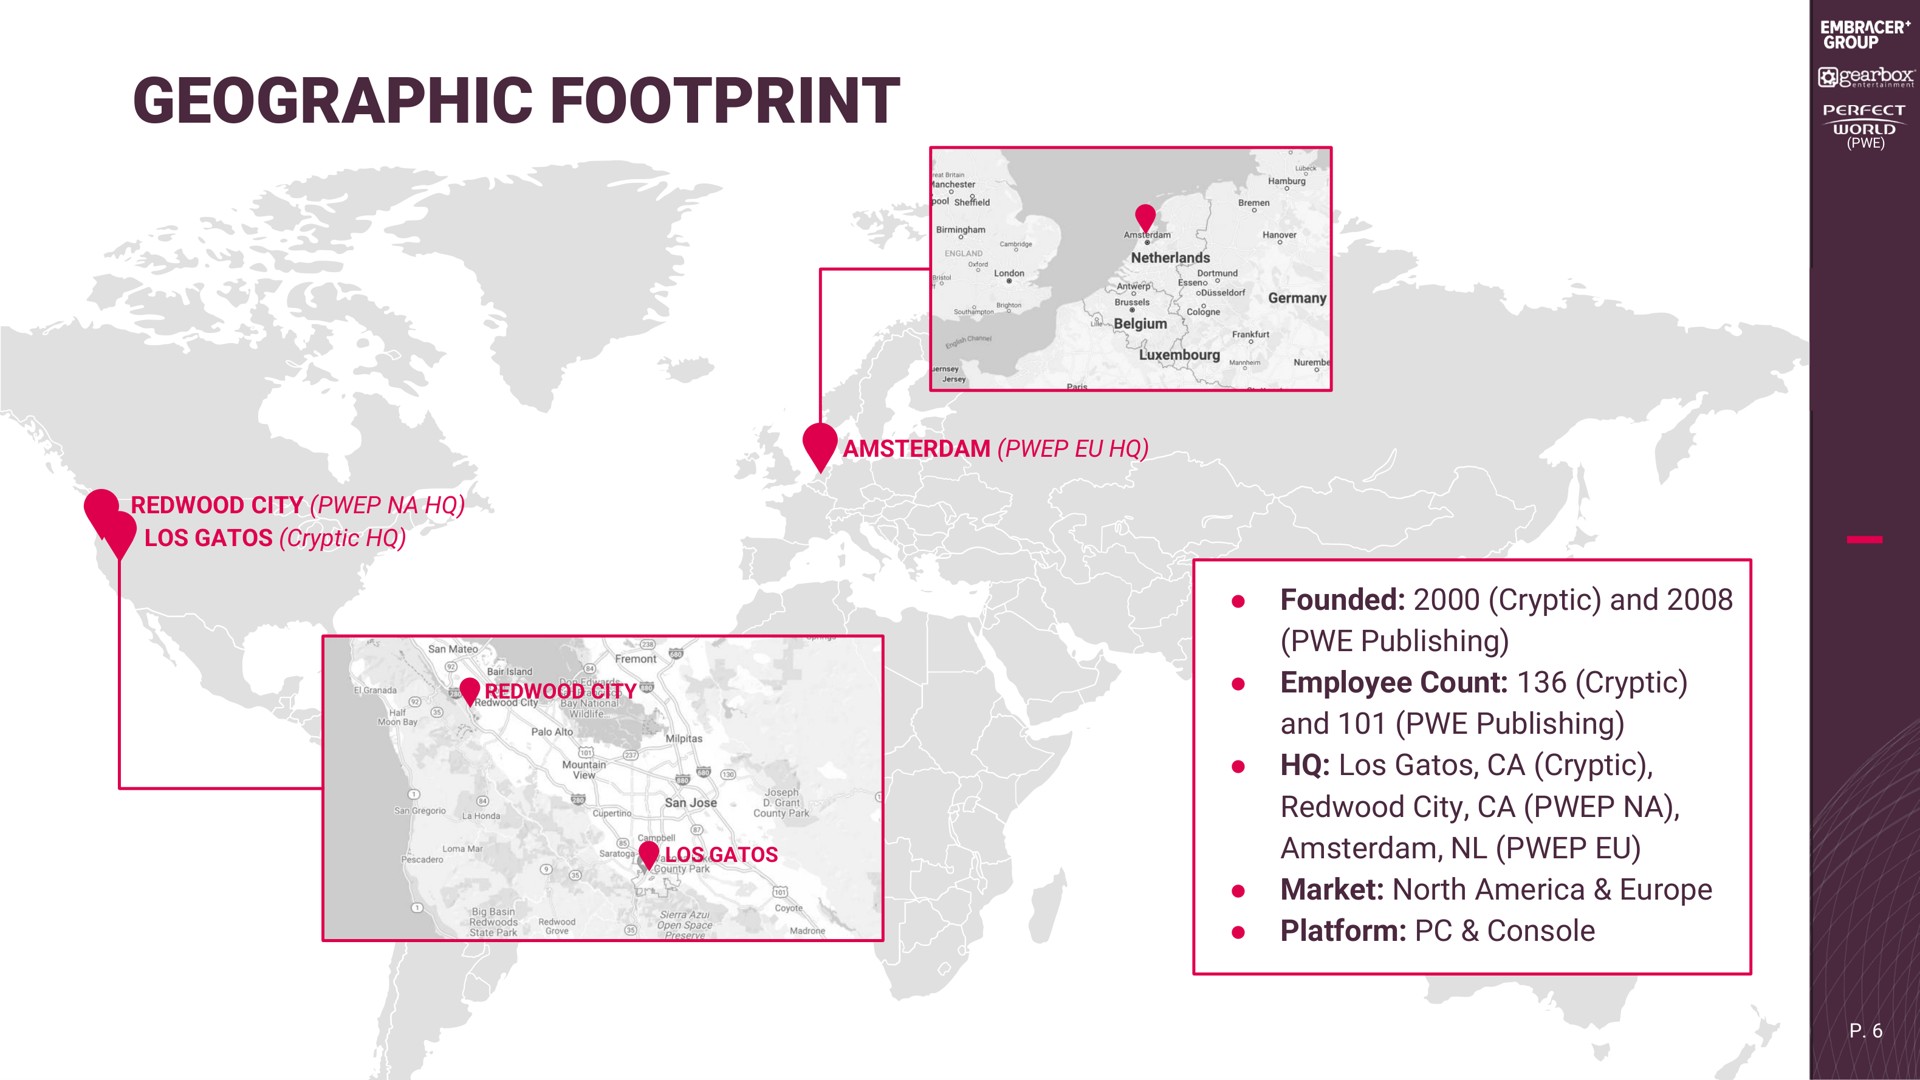 geographic footprint a redwood city redwood city | Embracer Group